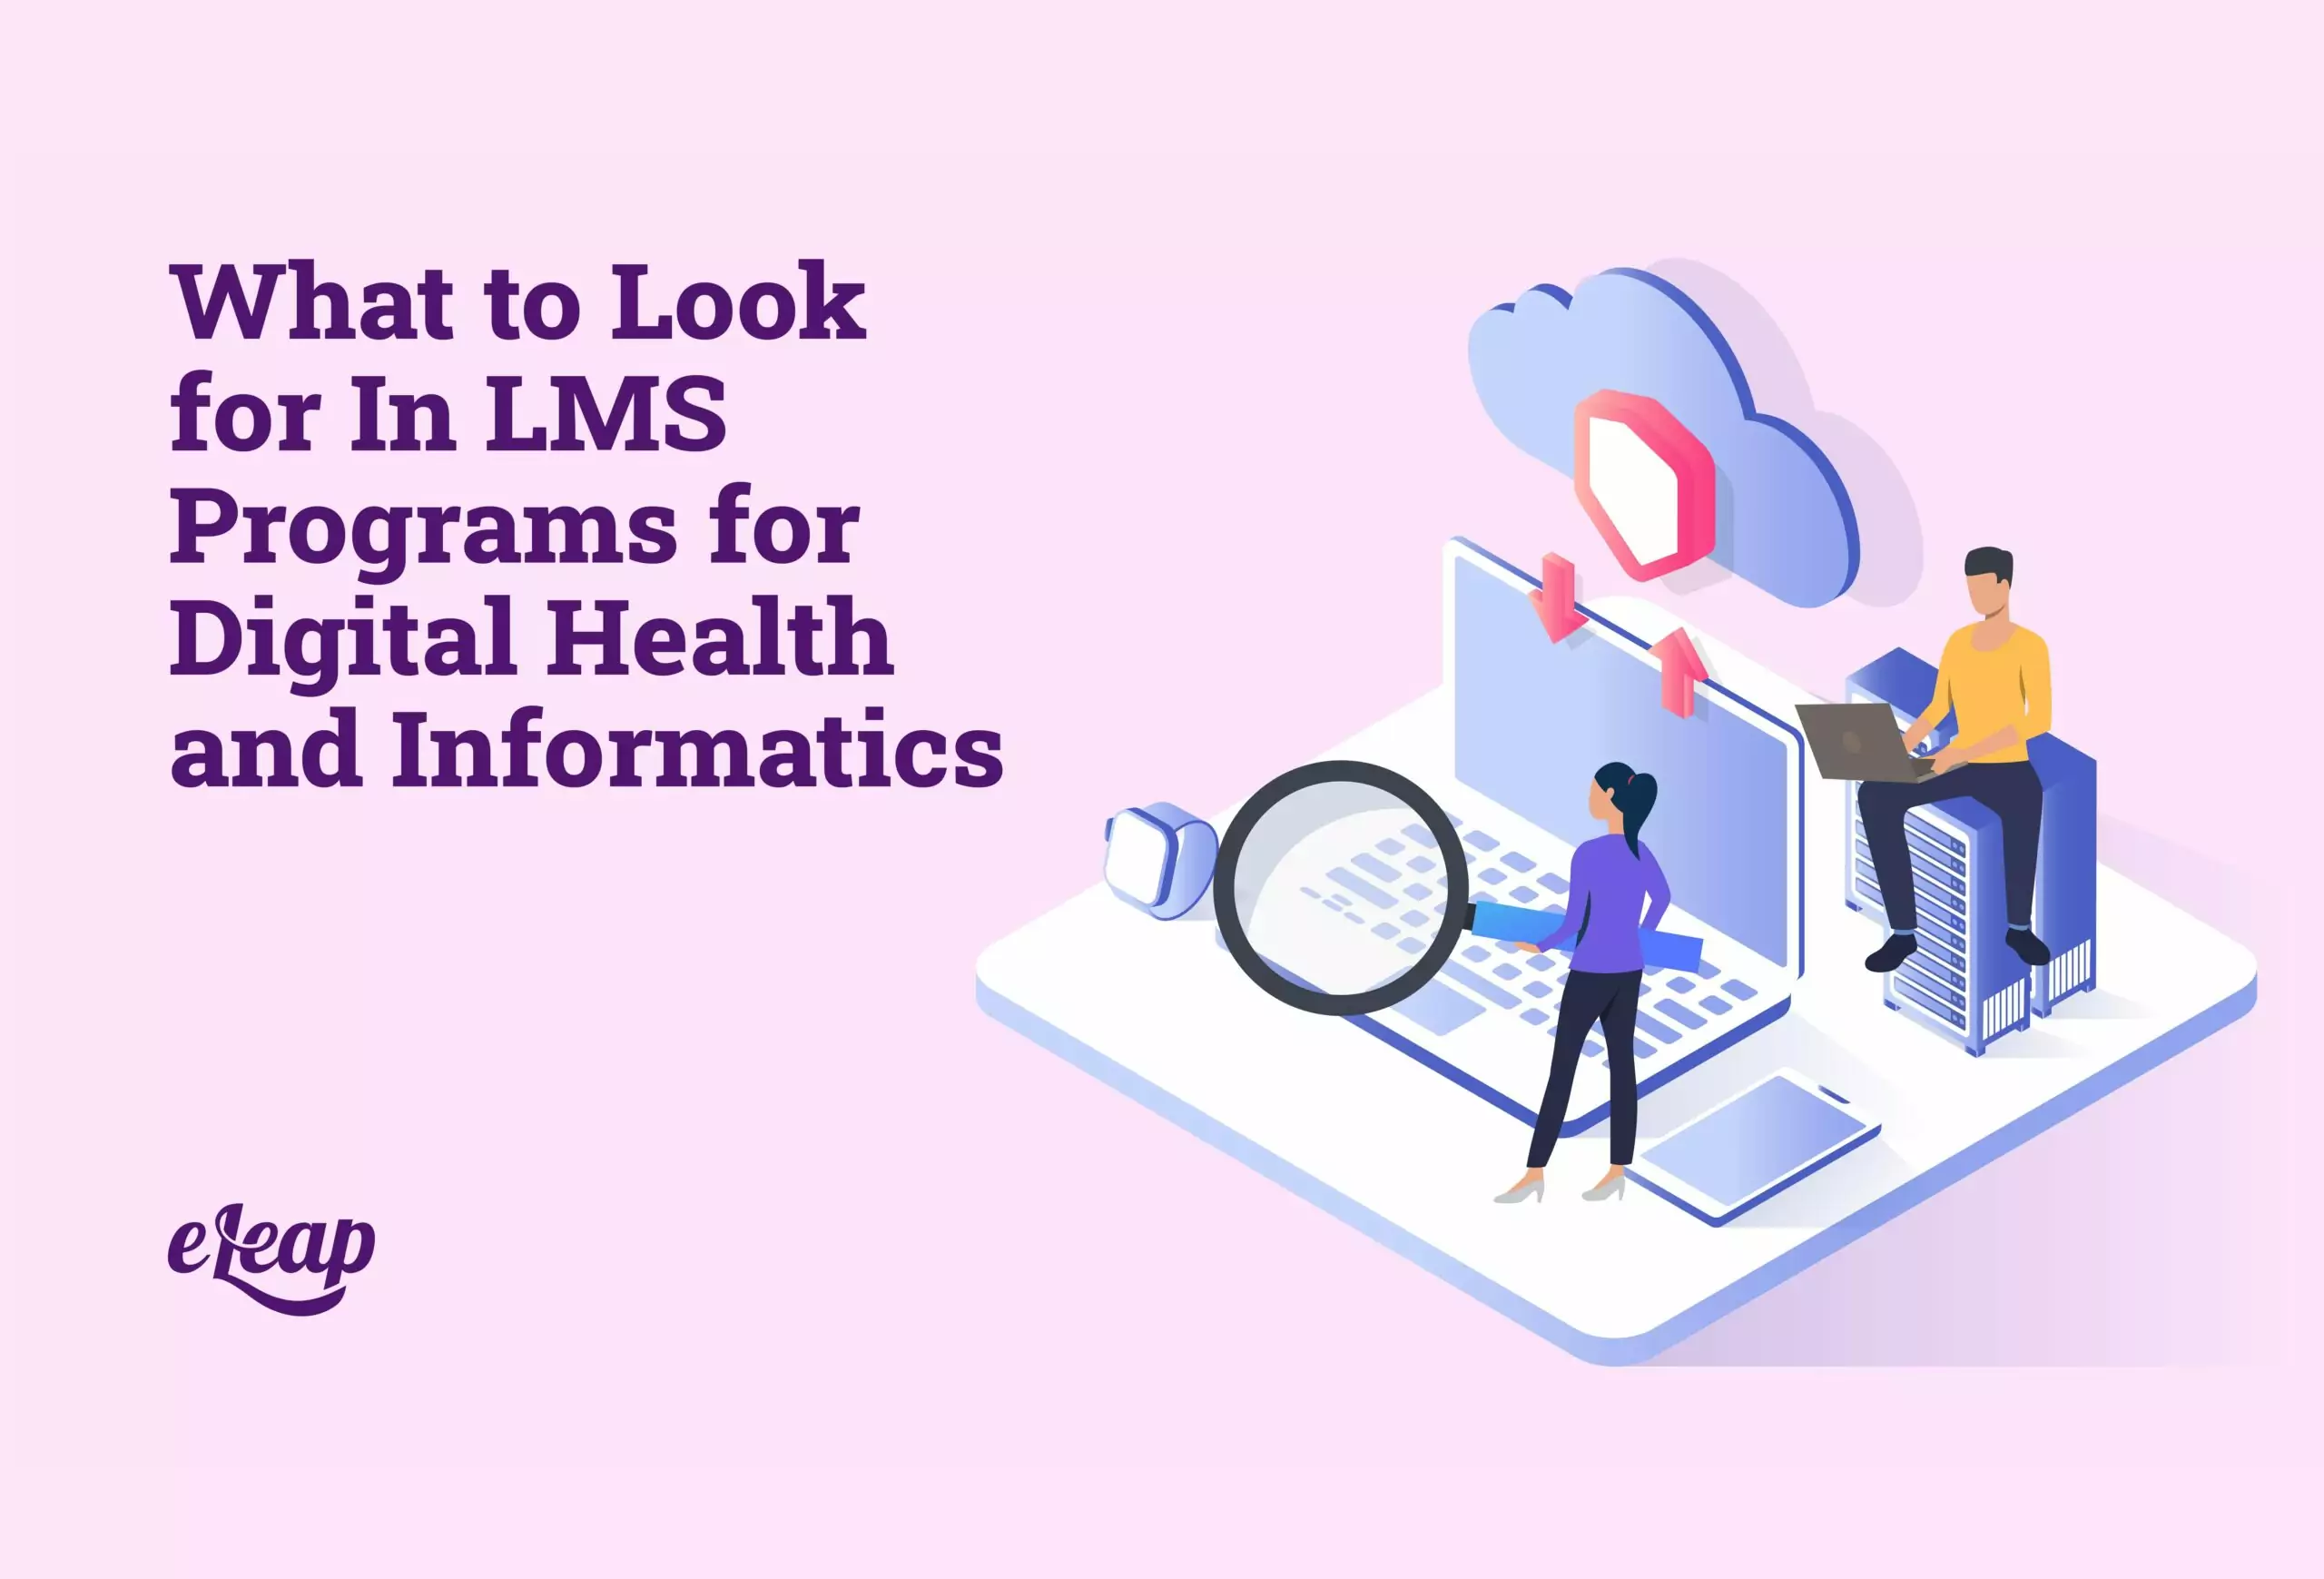 What to Look for In LMS Programs for Digital Health and Informatics